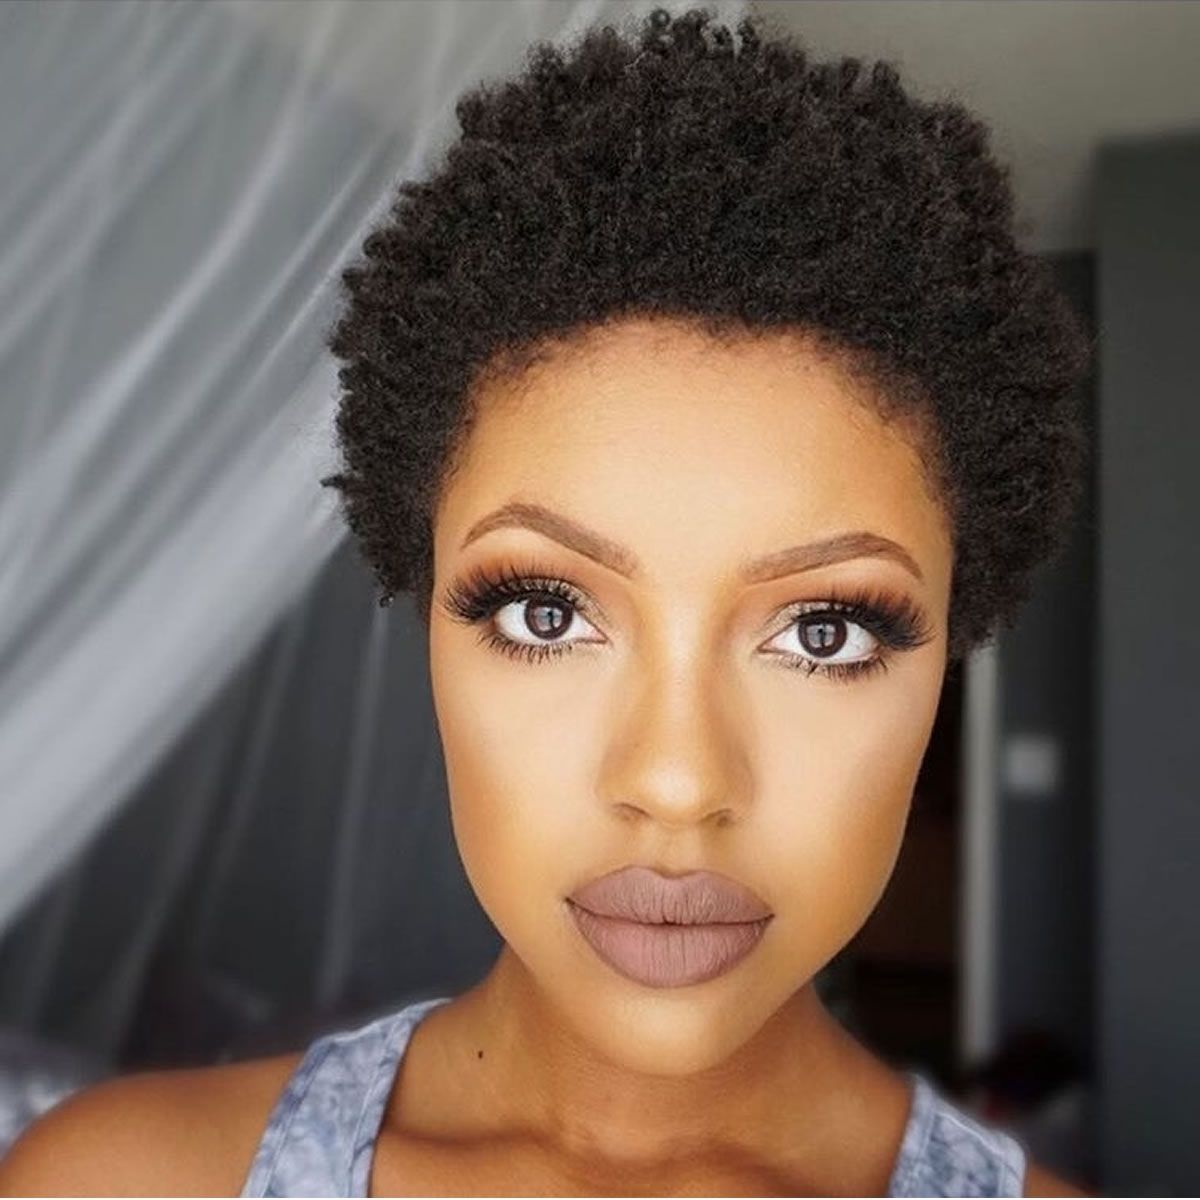 2018 Pixie Haircuts For Black Women – 26 Coolest Black Fine Hair With Regard To Most Up To Date Short Pixie Hairstyles For Black Women (View 11 of 15)